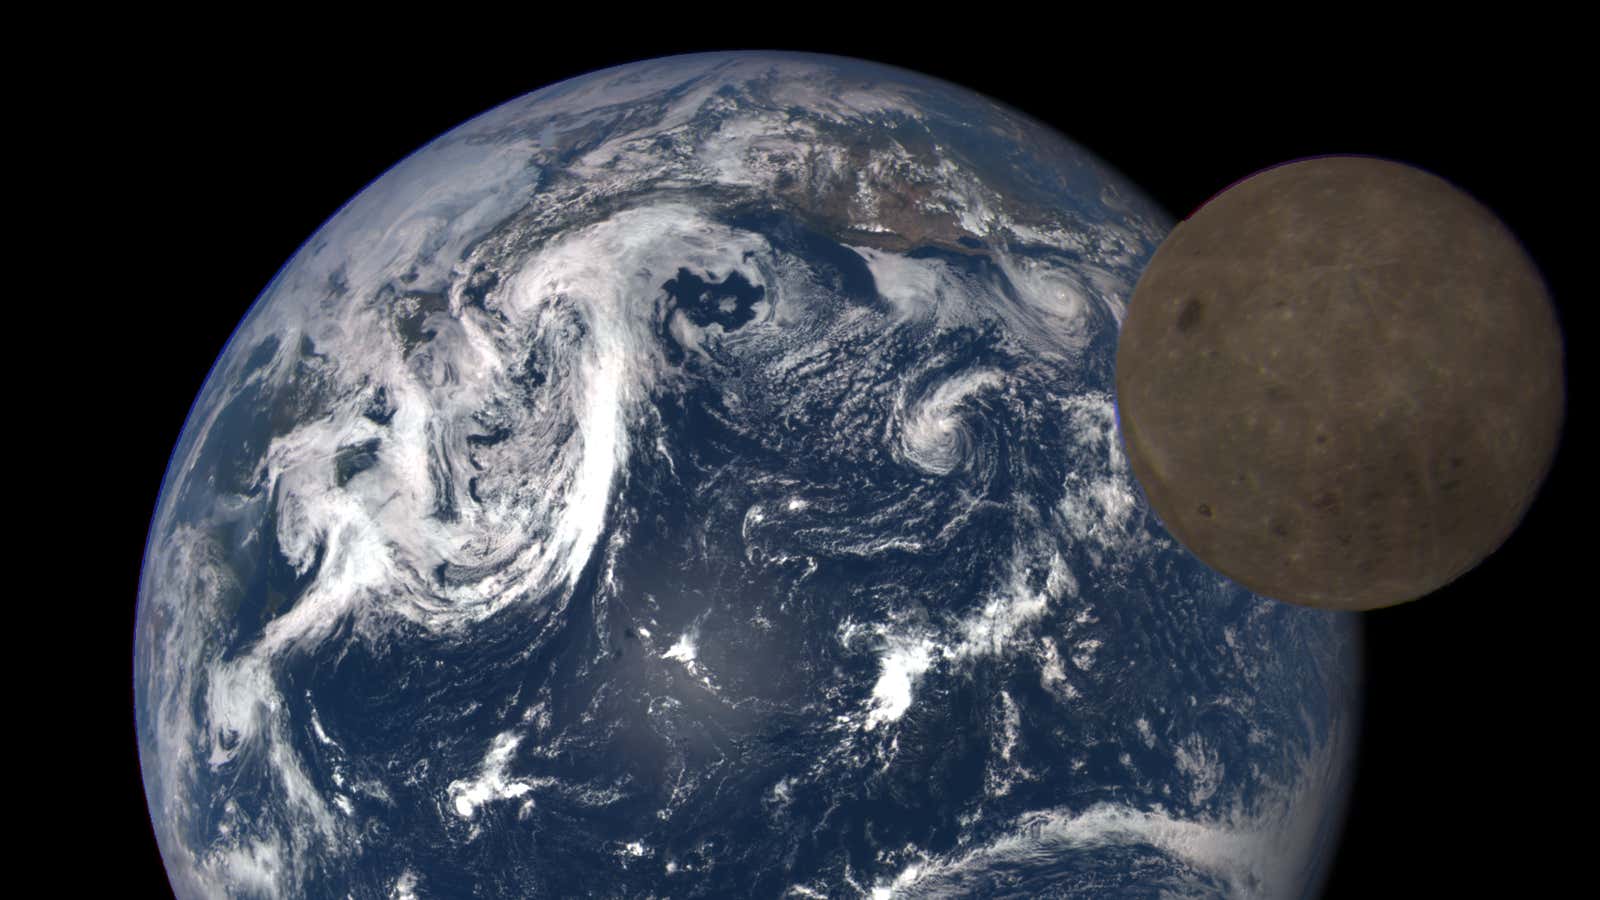 Earth and moon as seen from DSCOVR.